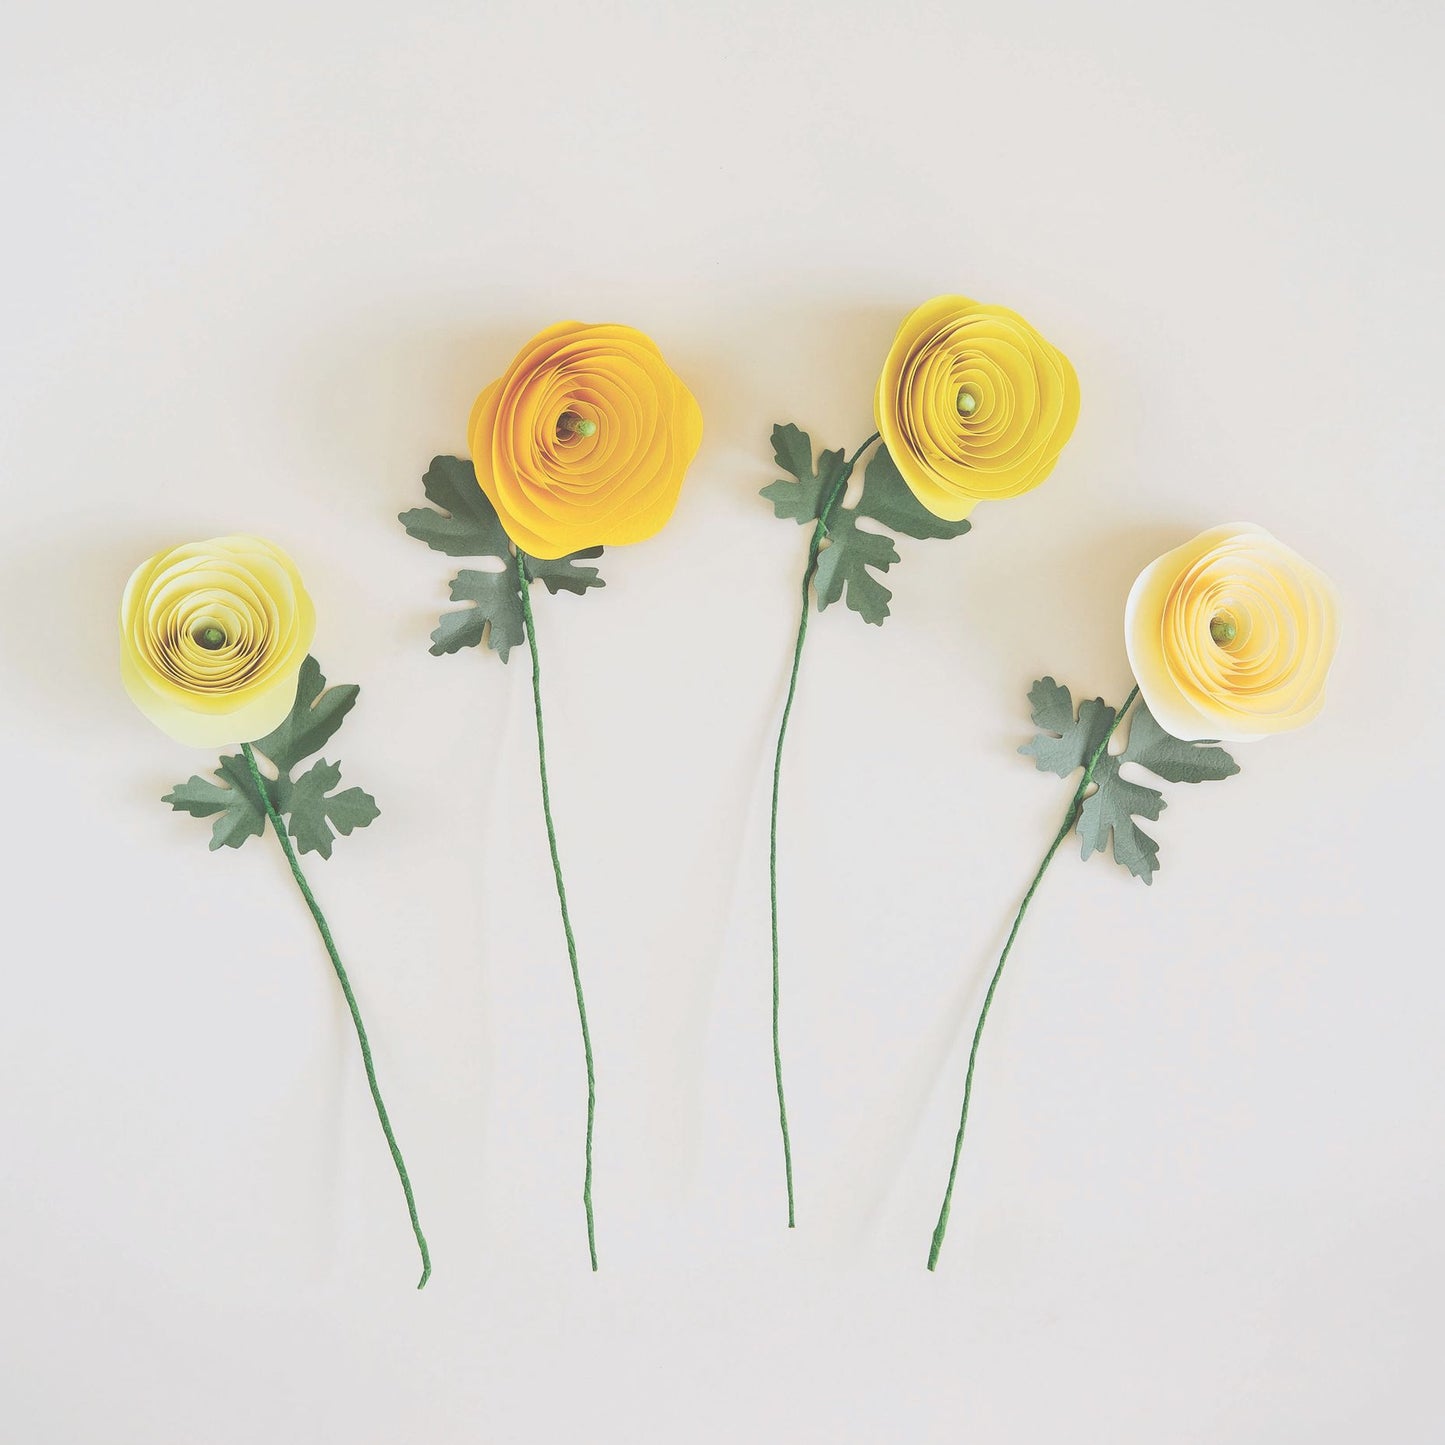 How to make paper flowers - Selvedge Magazine